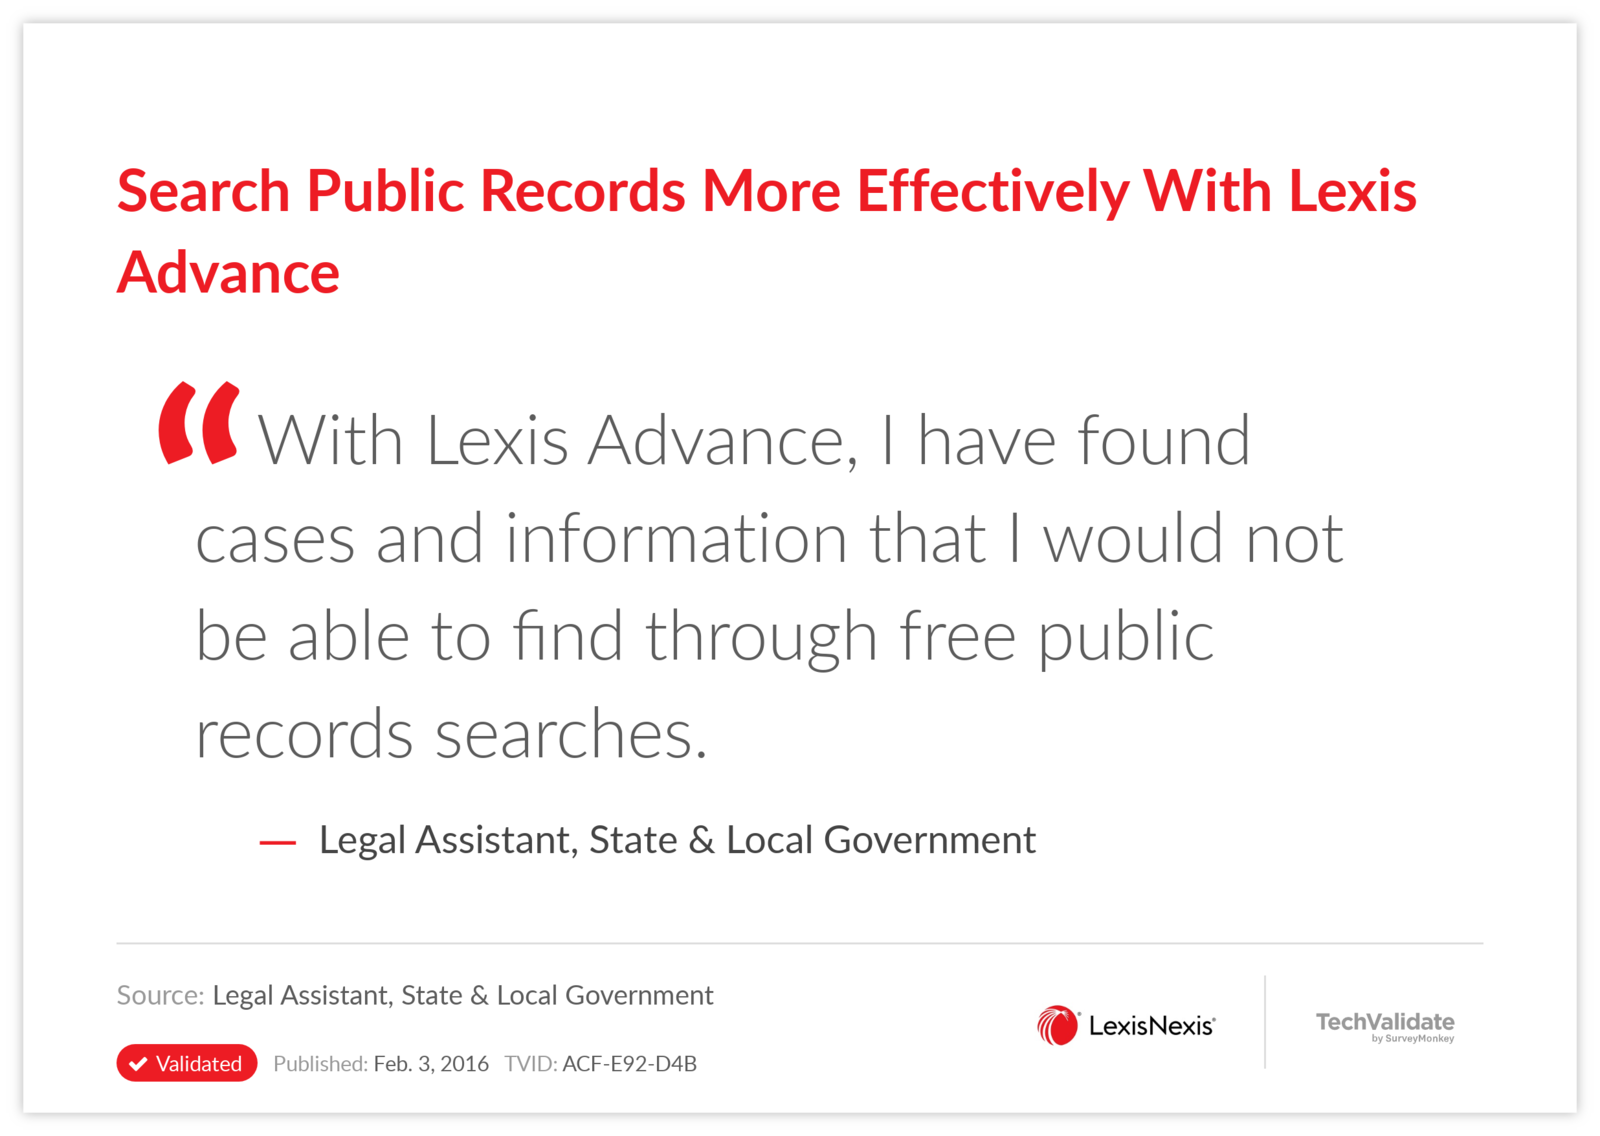 Search Public Records More Effectively With Lexis Advance